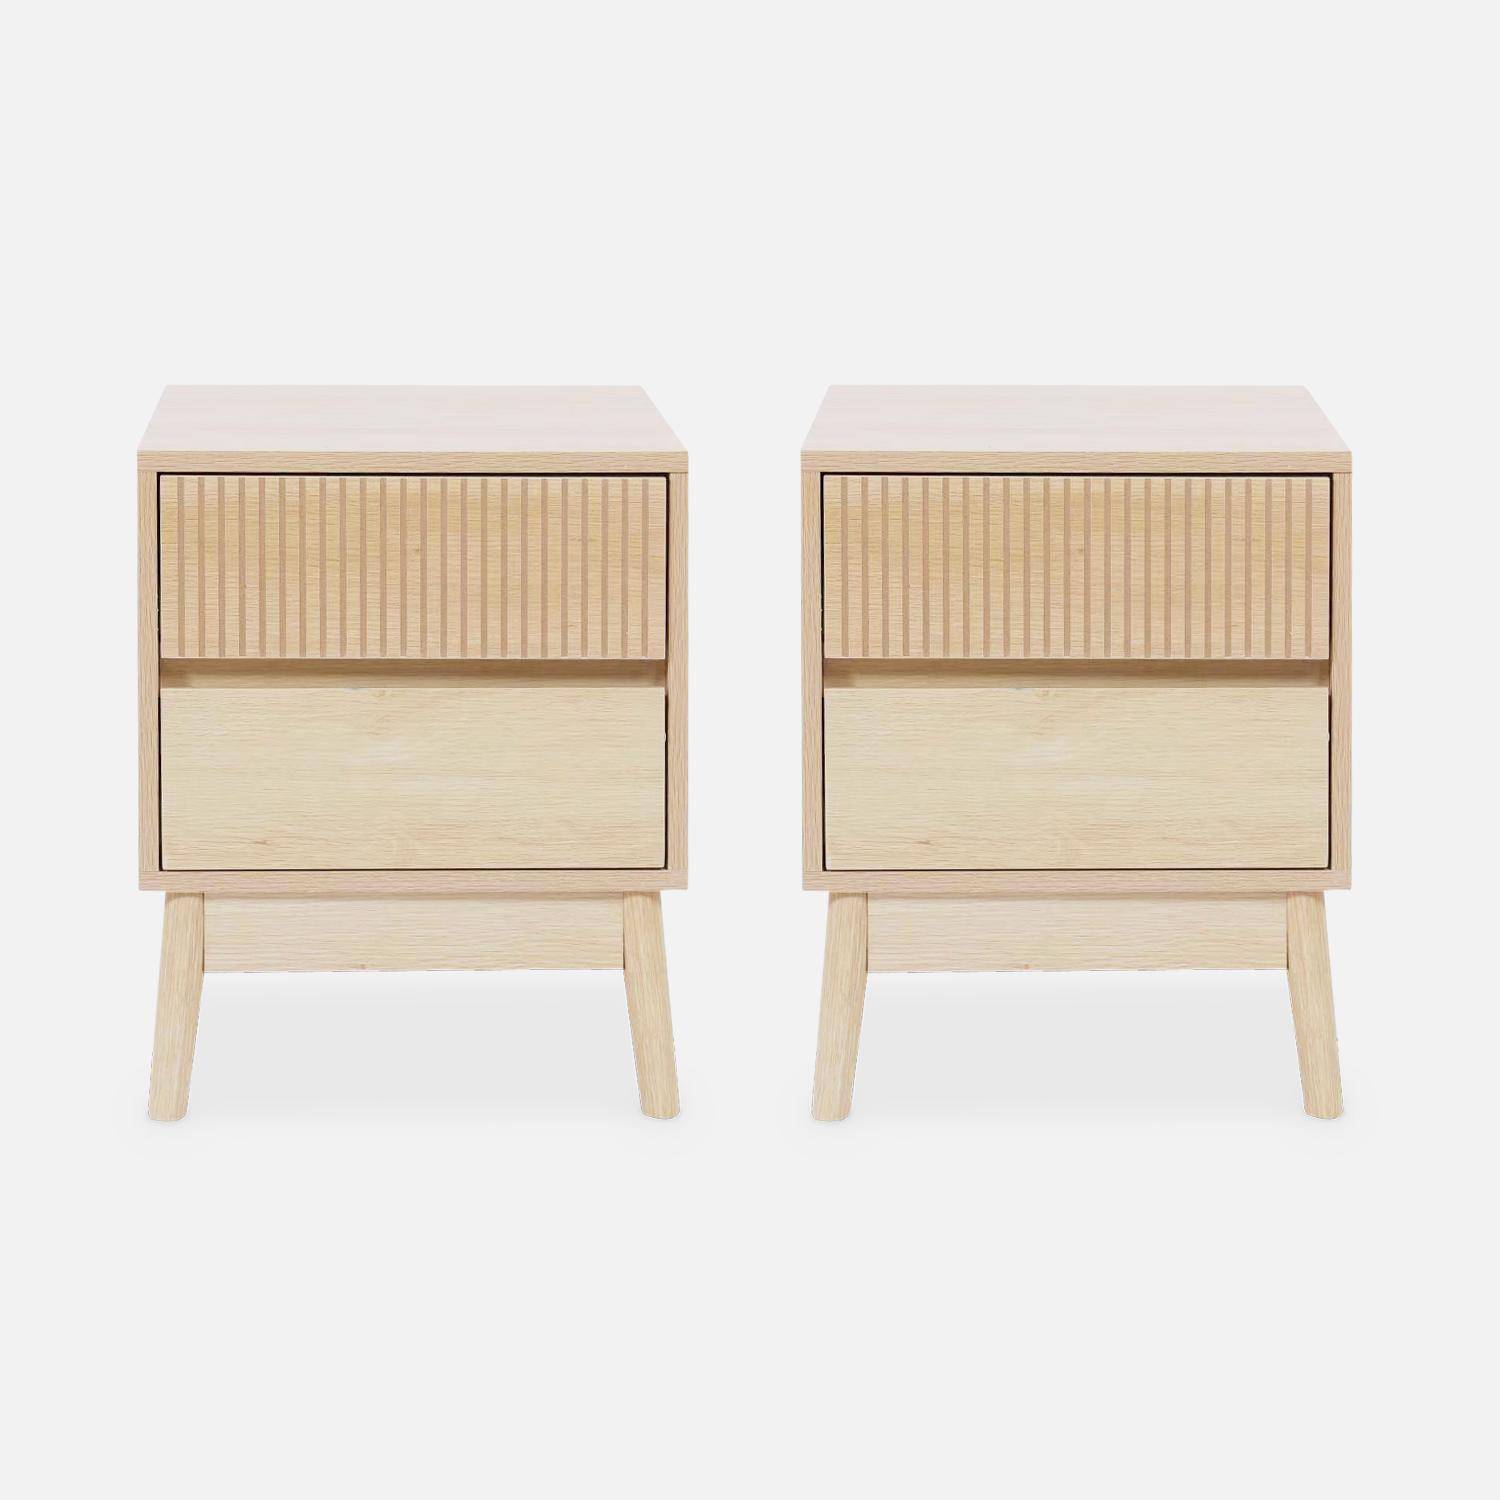 Pair of grooved wooden bedside tables with 2 drawers, 40x39x48cm - Linear - Natural Wood colour Photo4